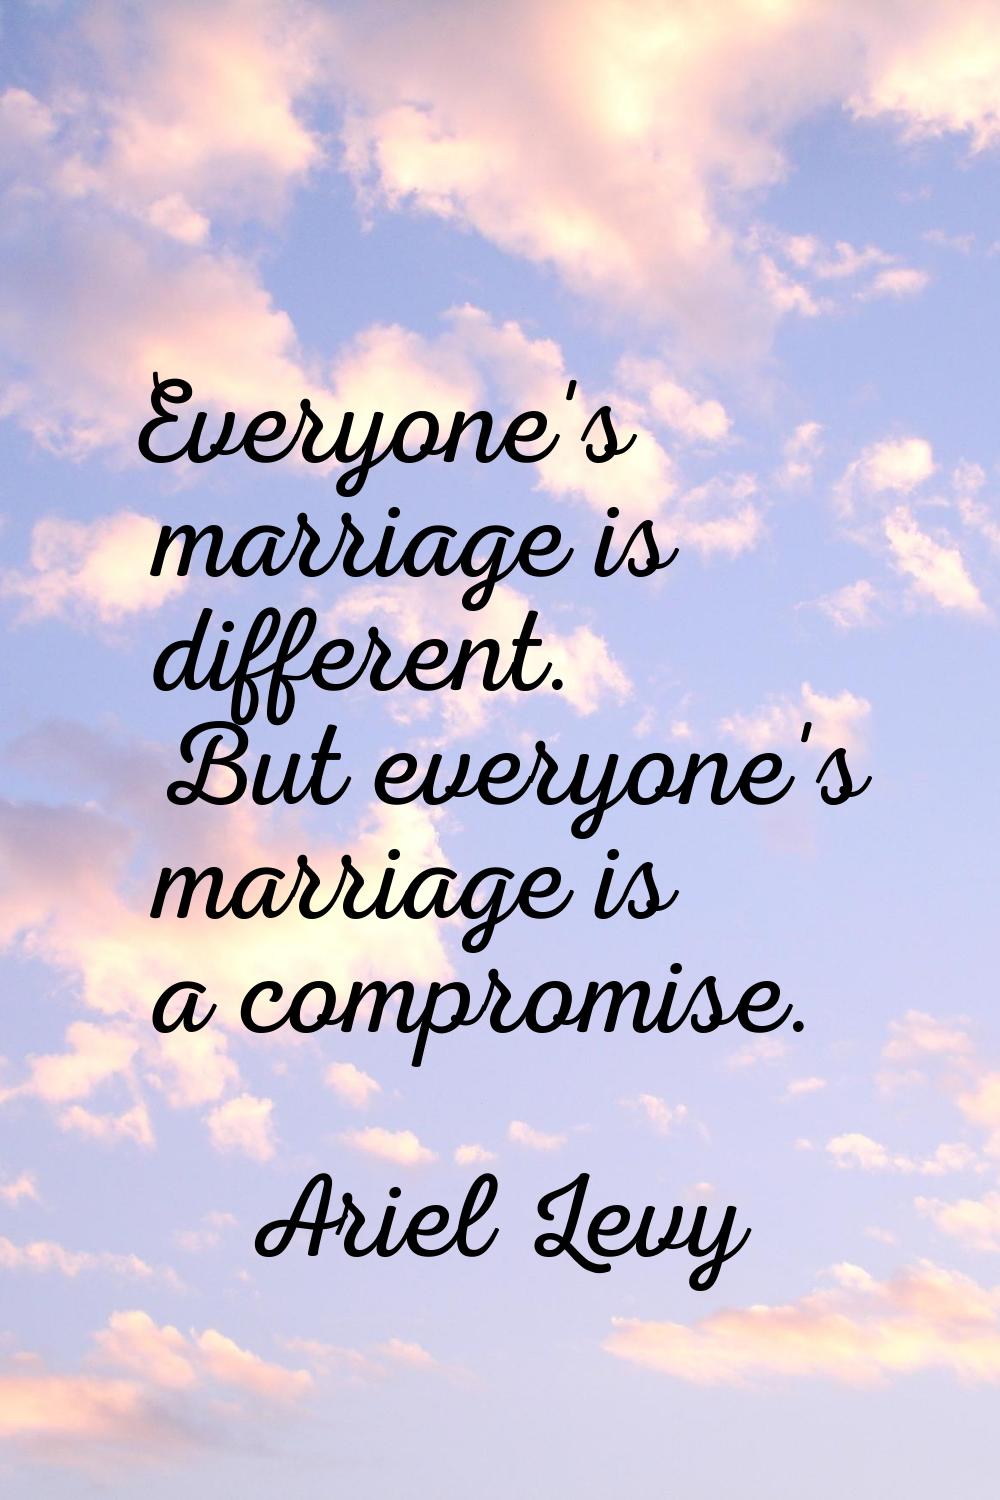 Everyone's marriage is different. But everyone's marriage is a compromise.